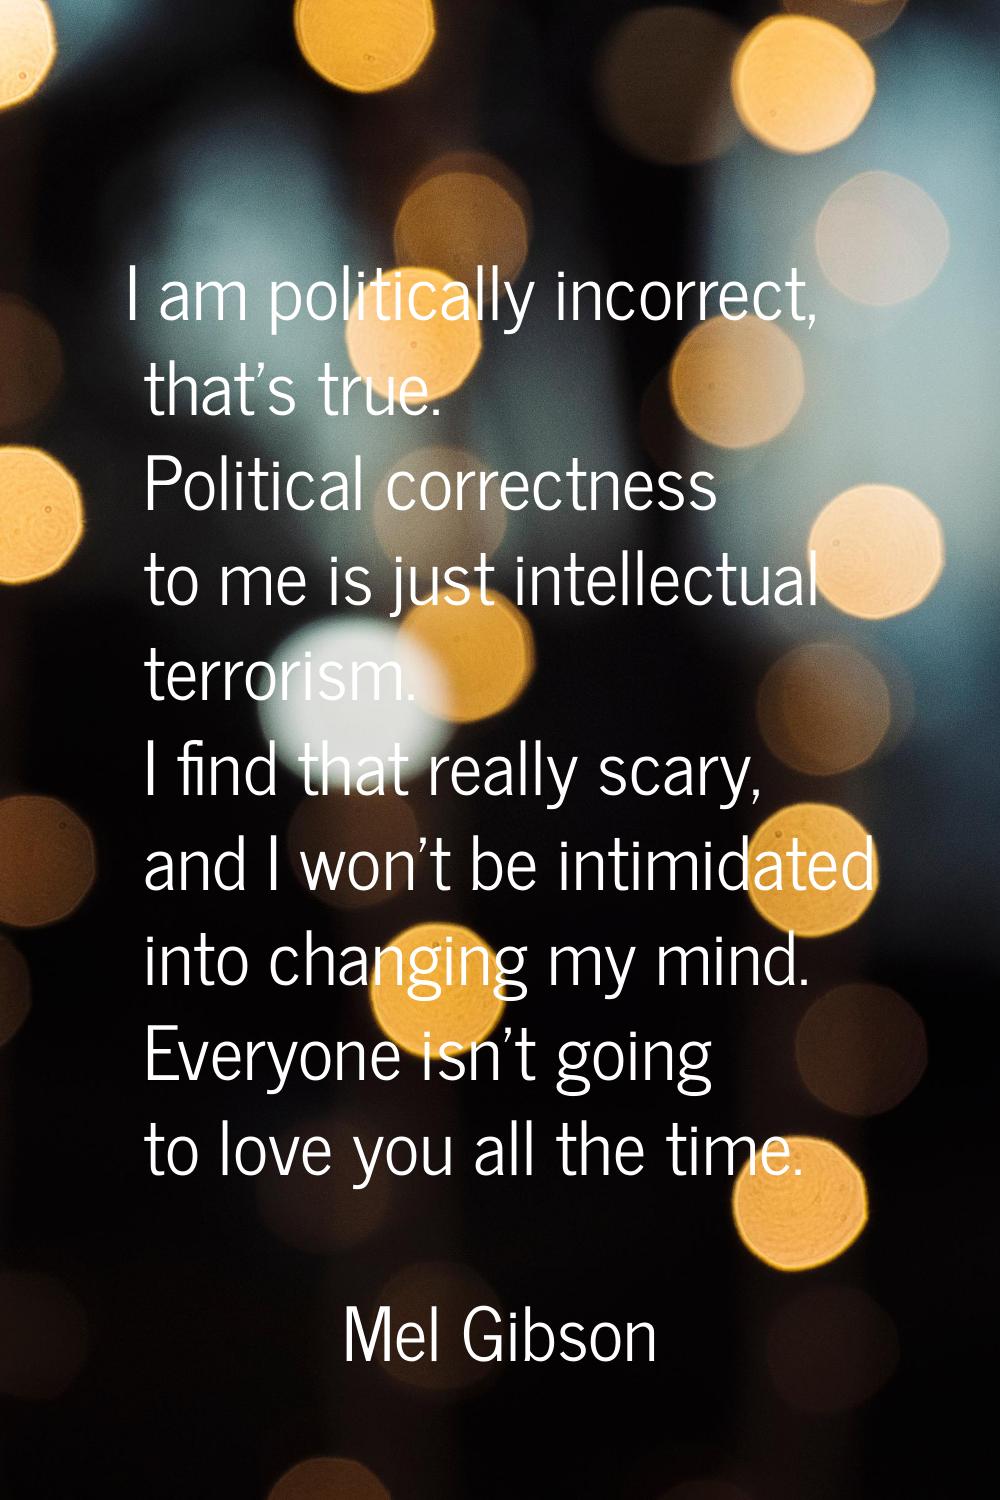 I am politically incorrect, that's true. Political correctness to me is just intellectual terrorism